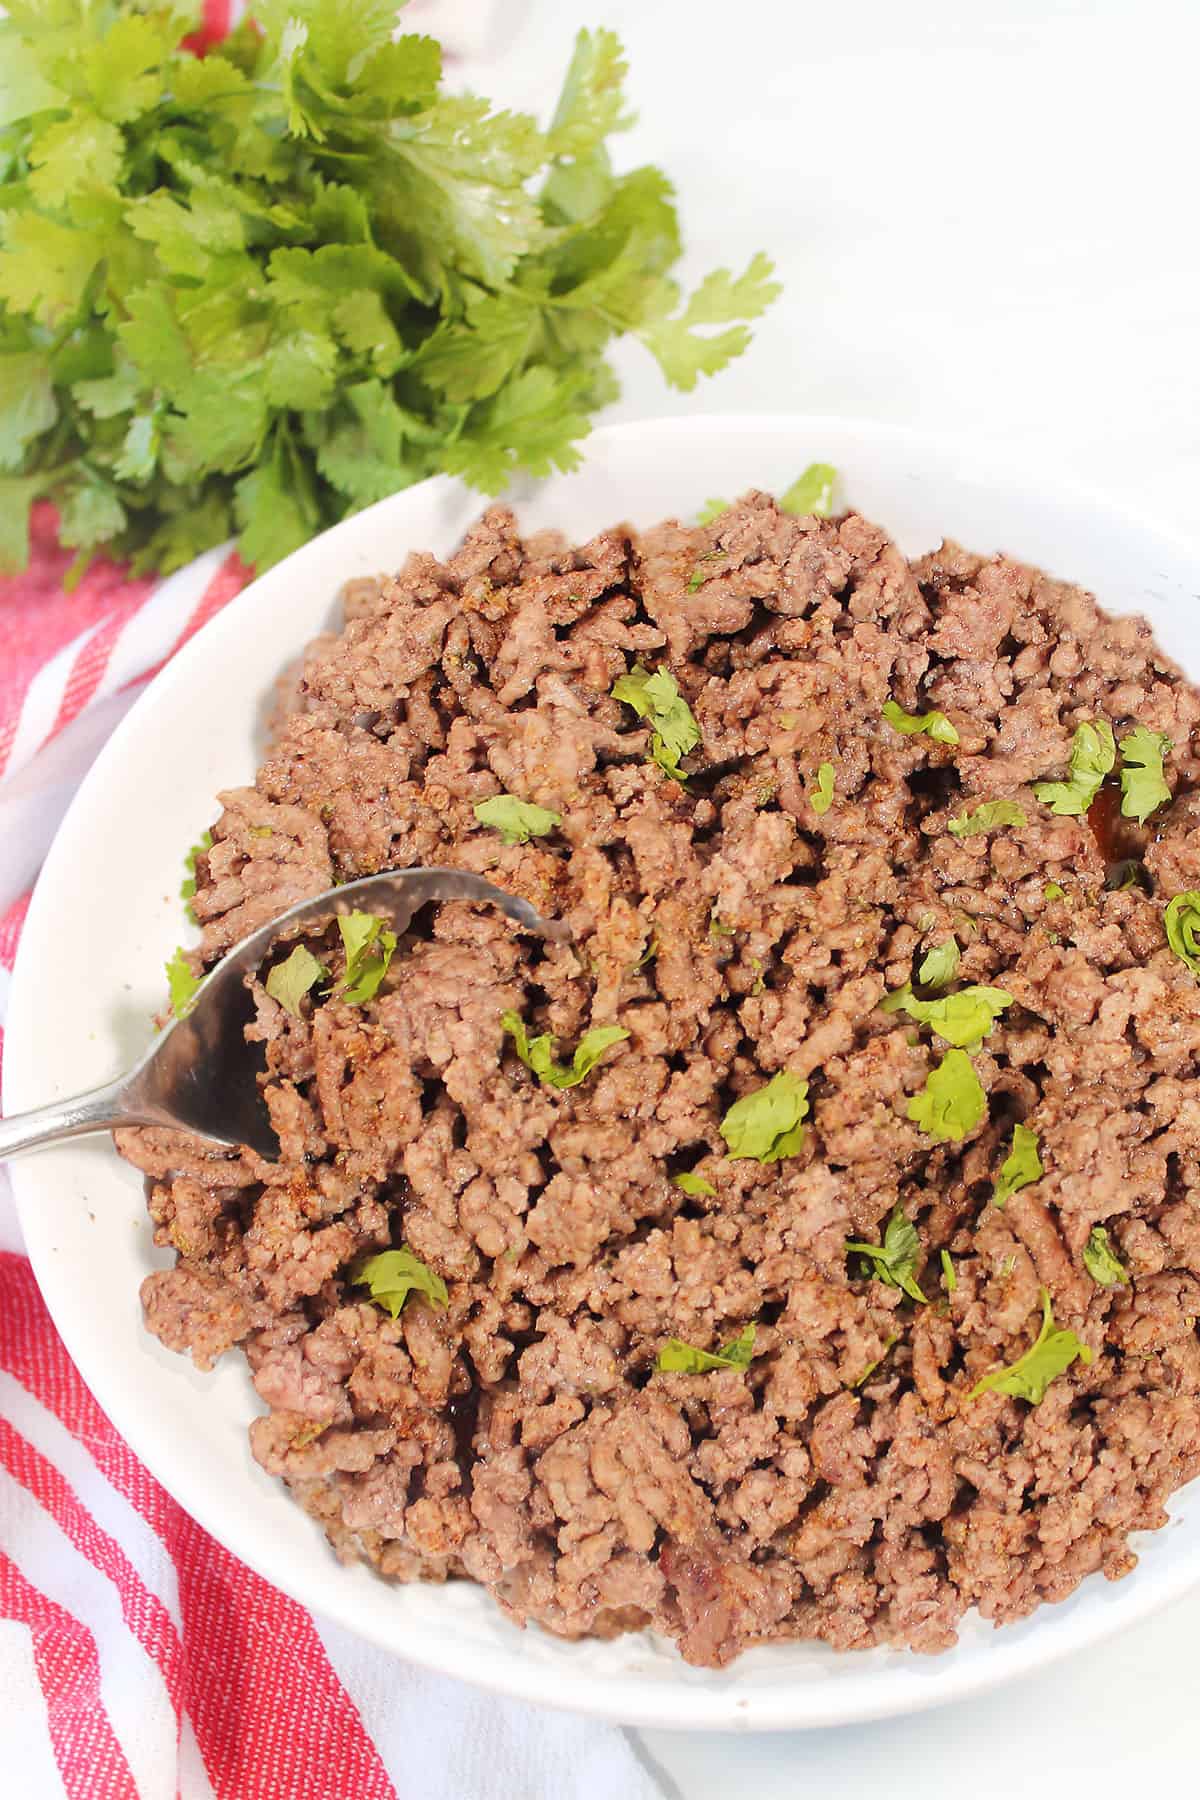 Bowl of seasoned ground beef with serving spoon.